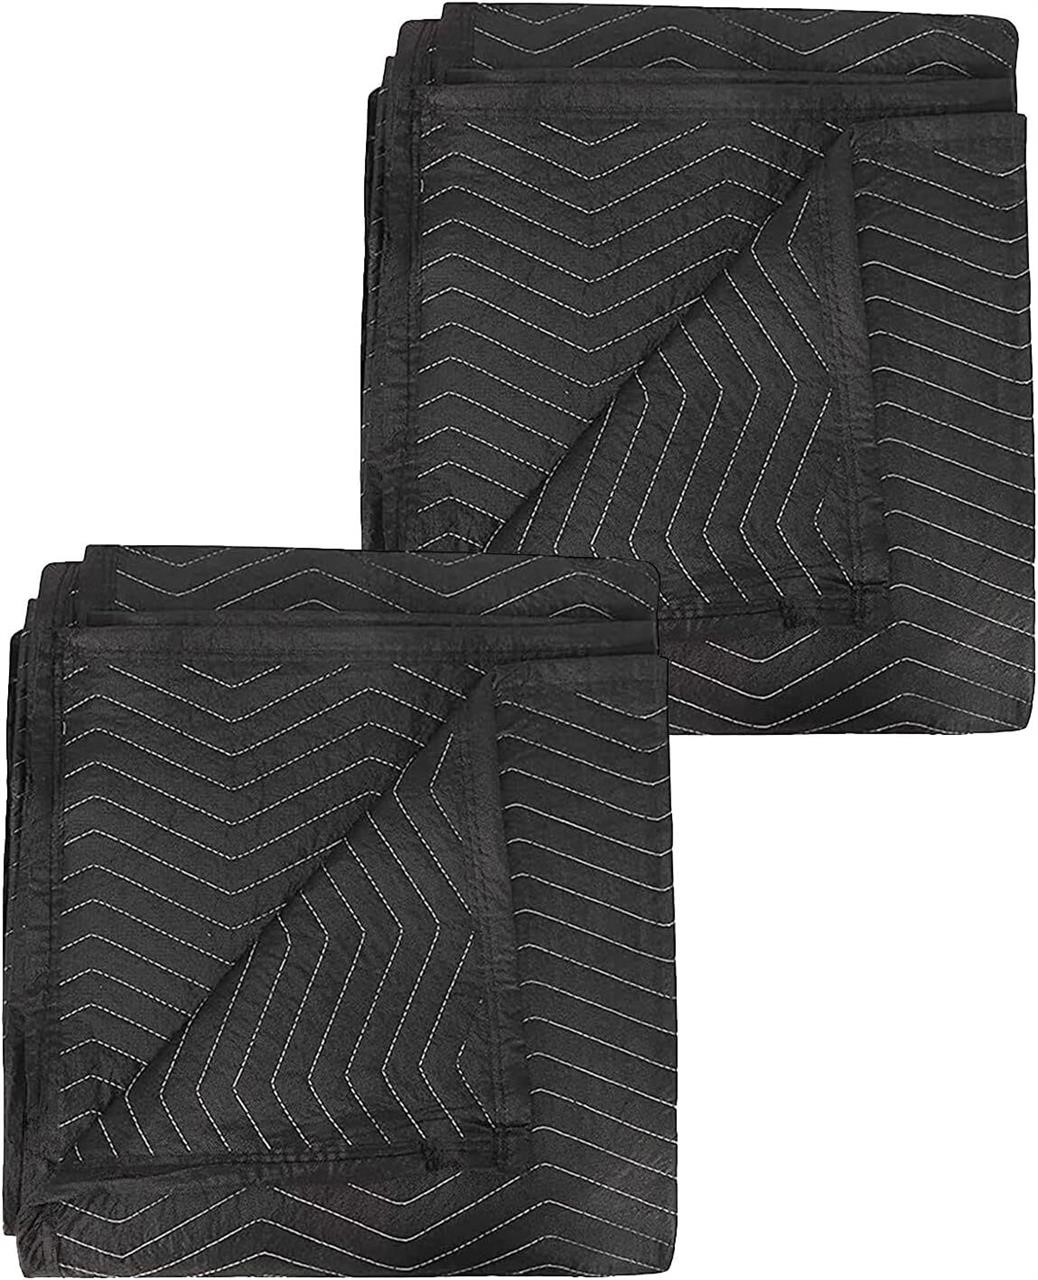 2 Pack Moving Blankets 40x72 Protection Pads